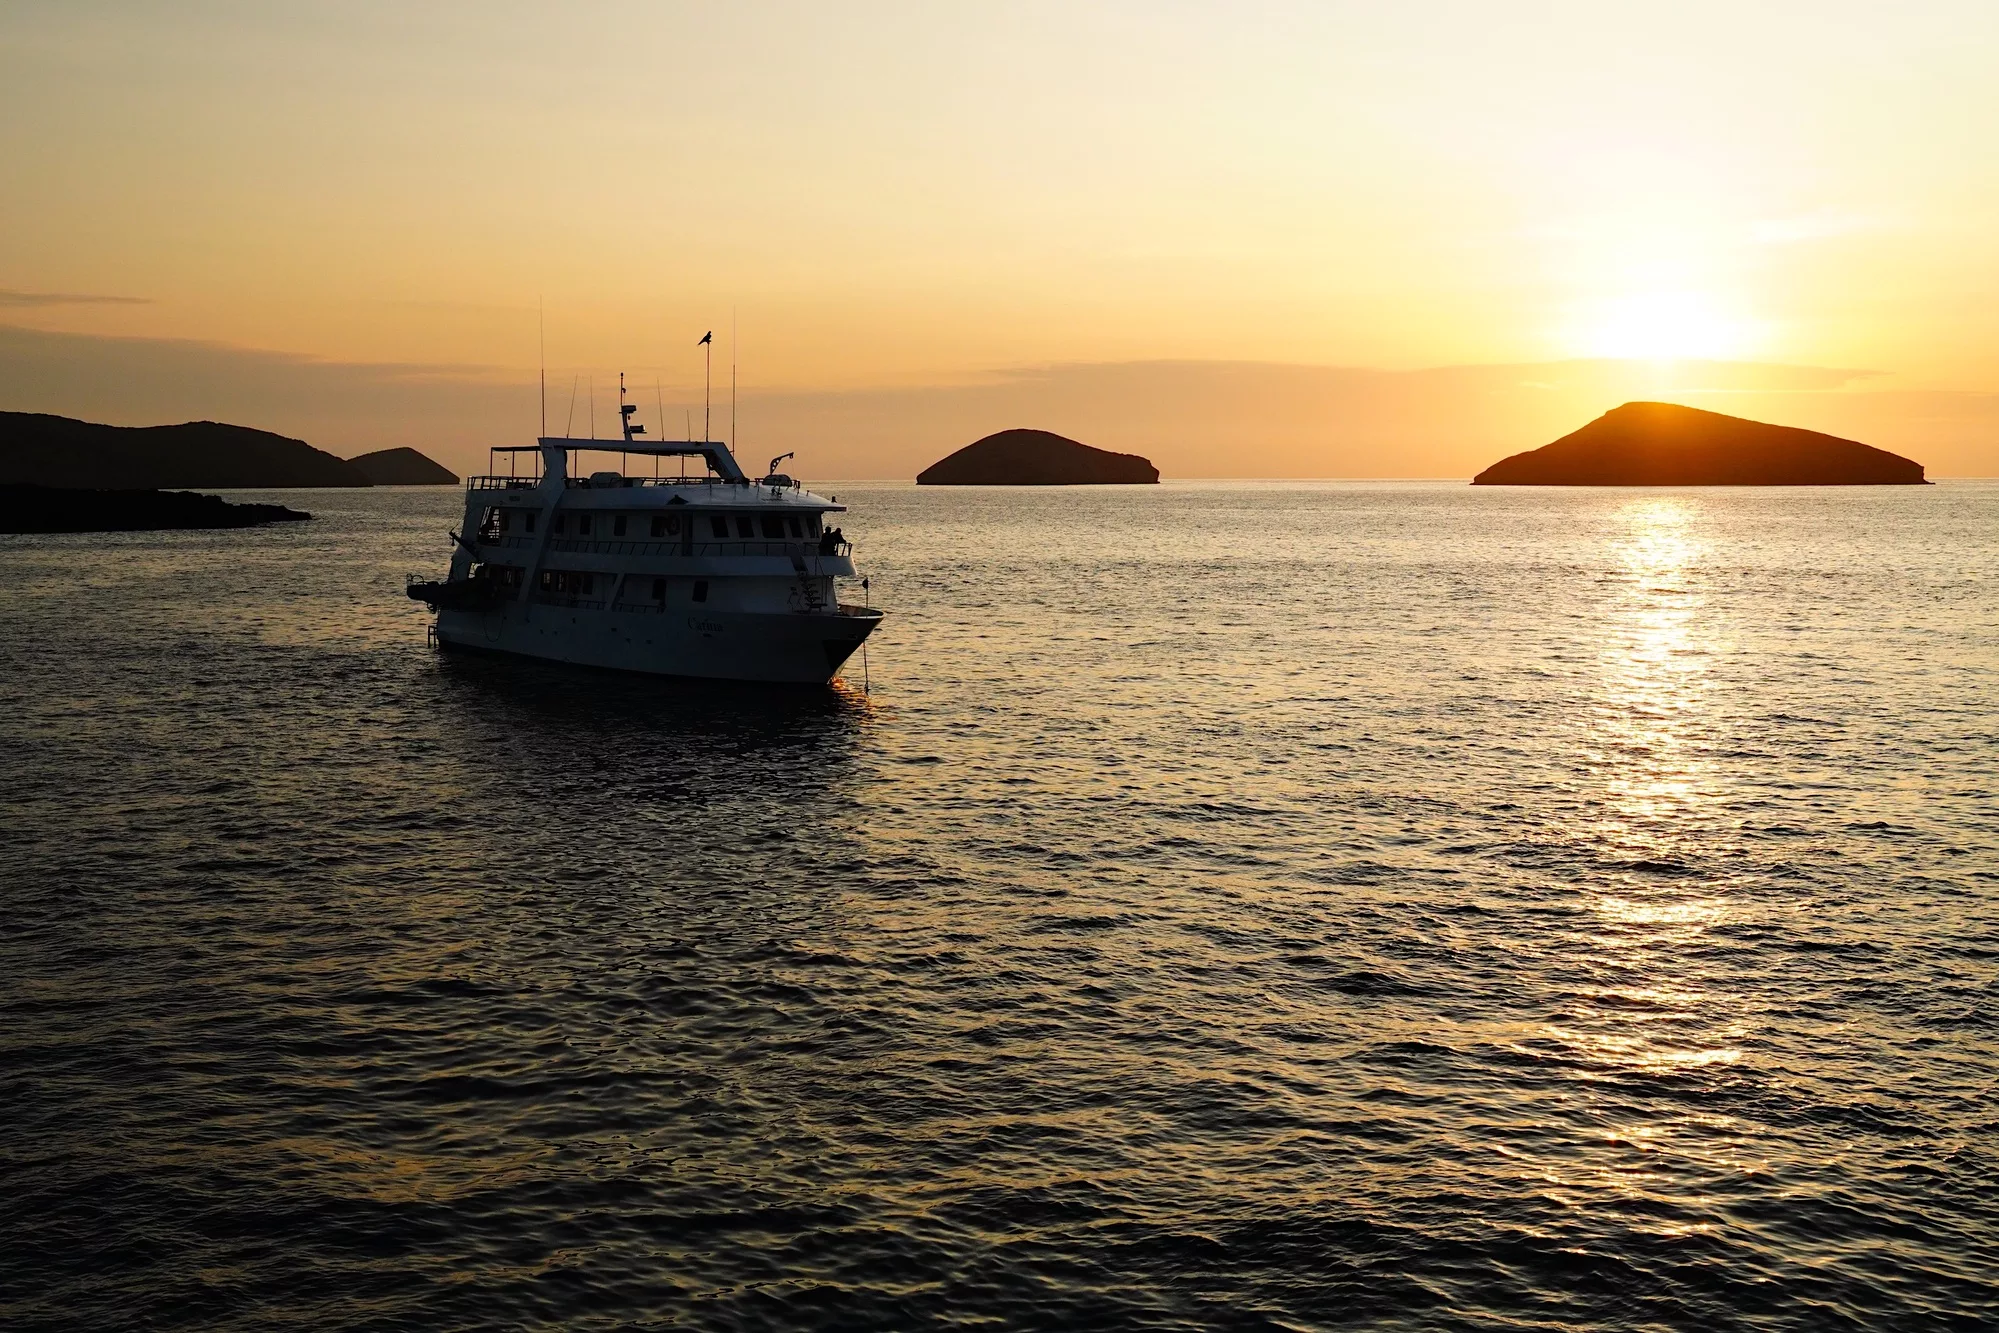 Galapagos Islands Yacht-Based Tour & Guided Photography Experience - Sunrise with yacht